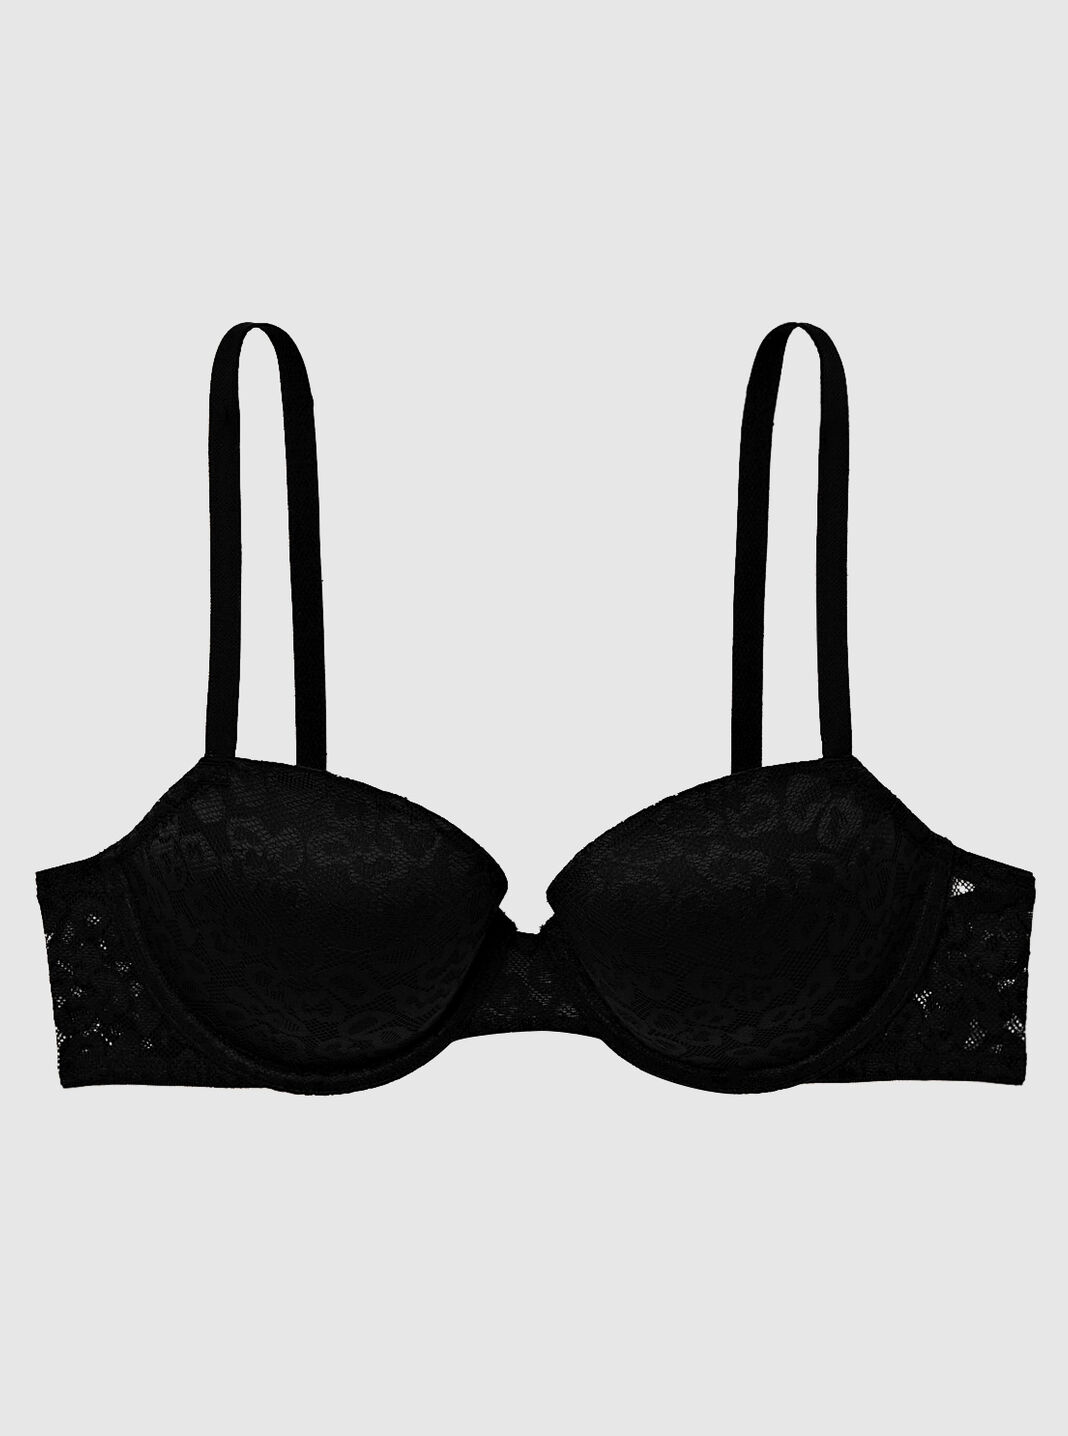 lasenza: FINAL HOURS $60 sexy set Join Club La Senza TODAY